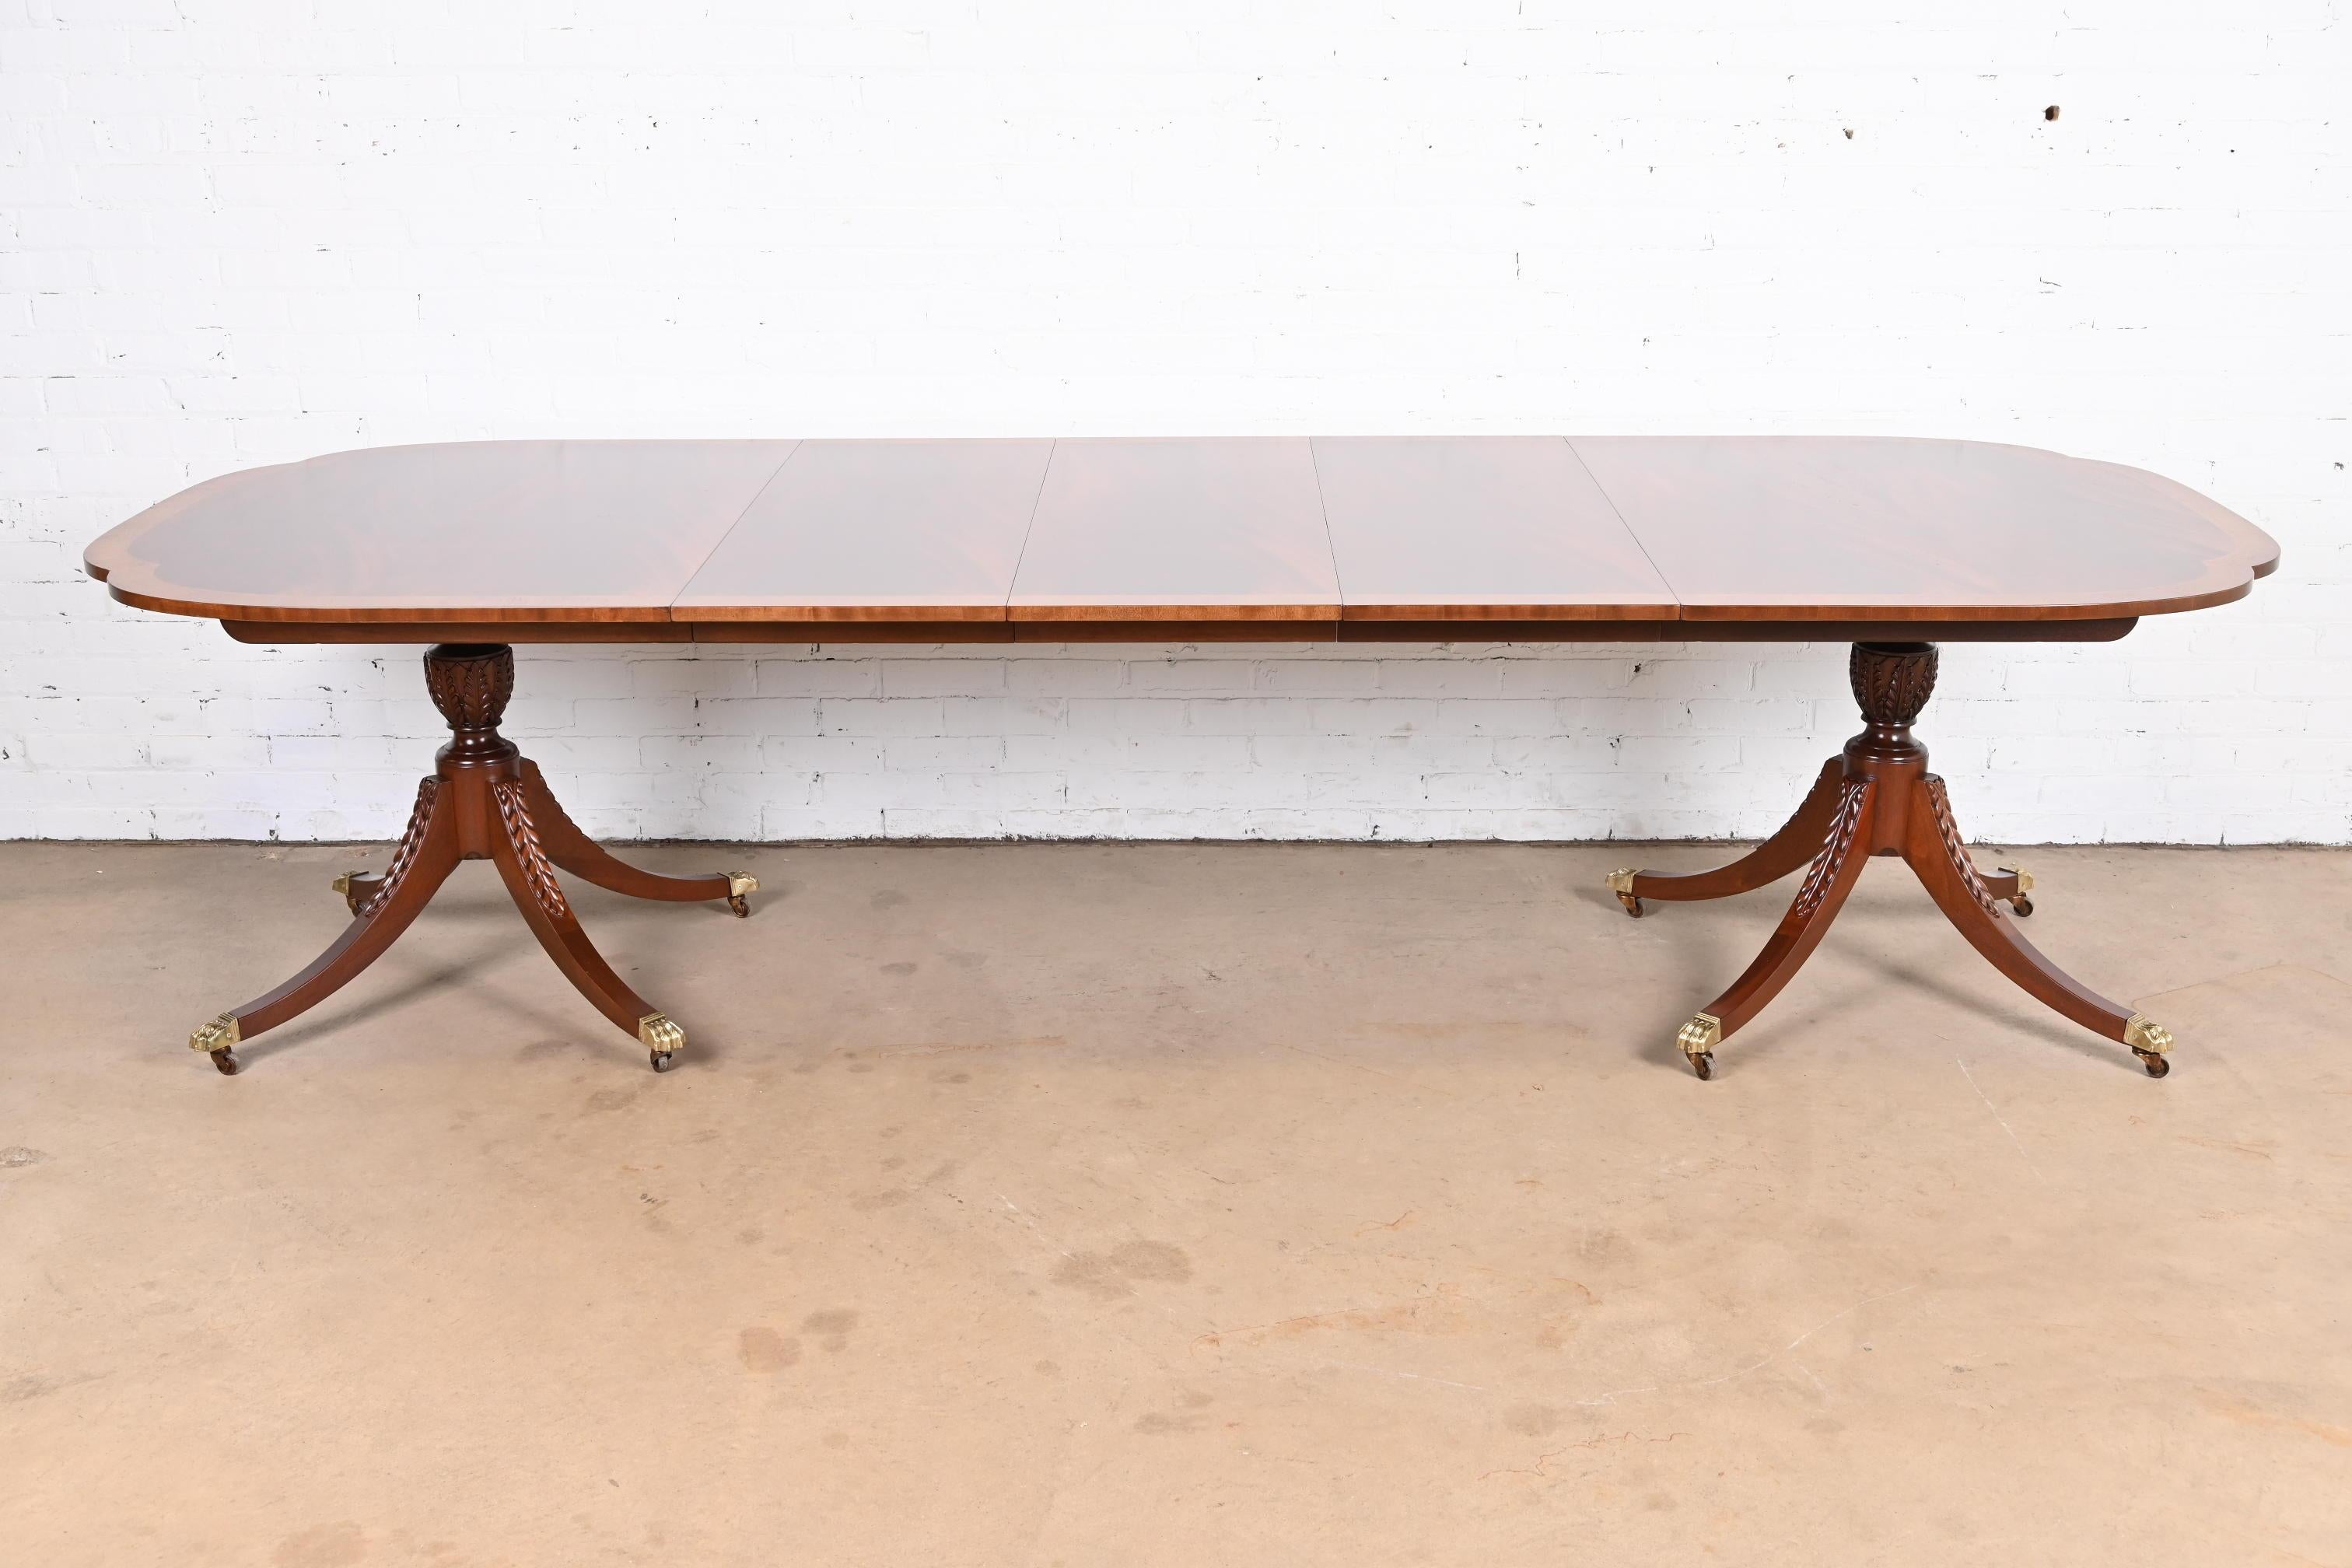 An exceptional Georgian style double pedestal extension dining table

By Baker Furniture, 